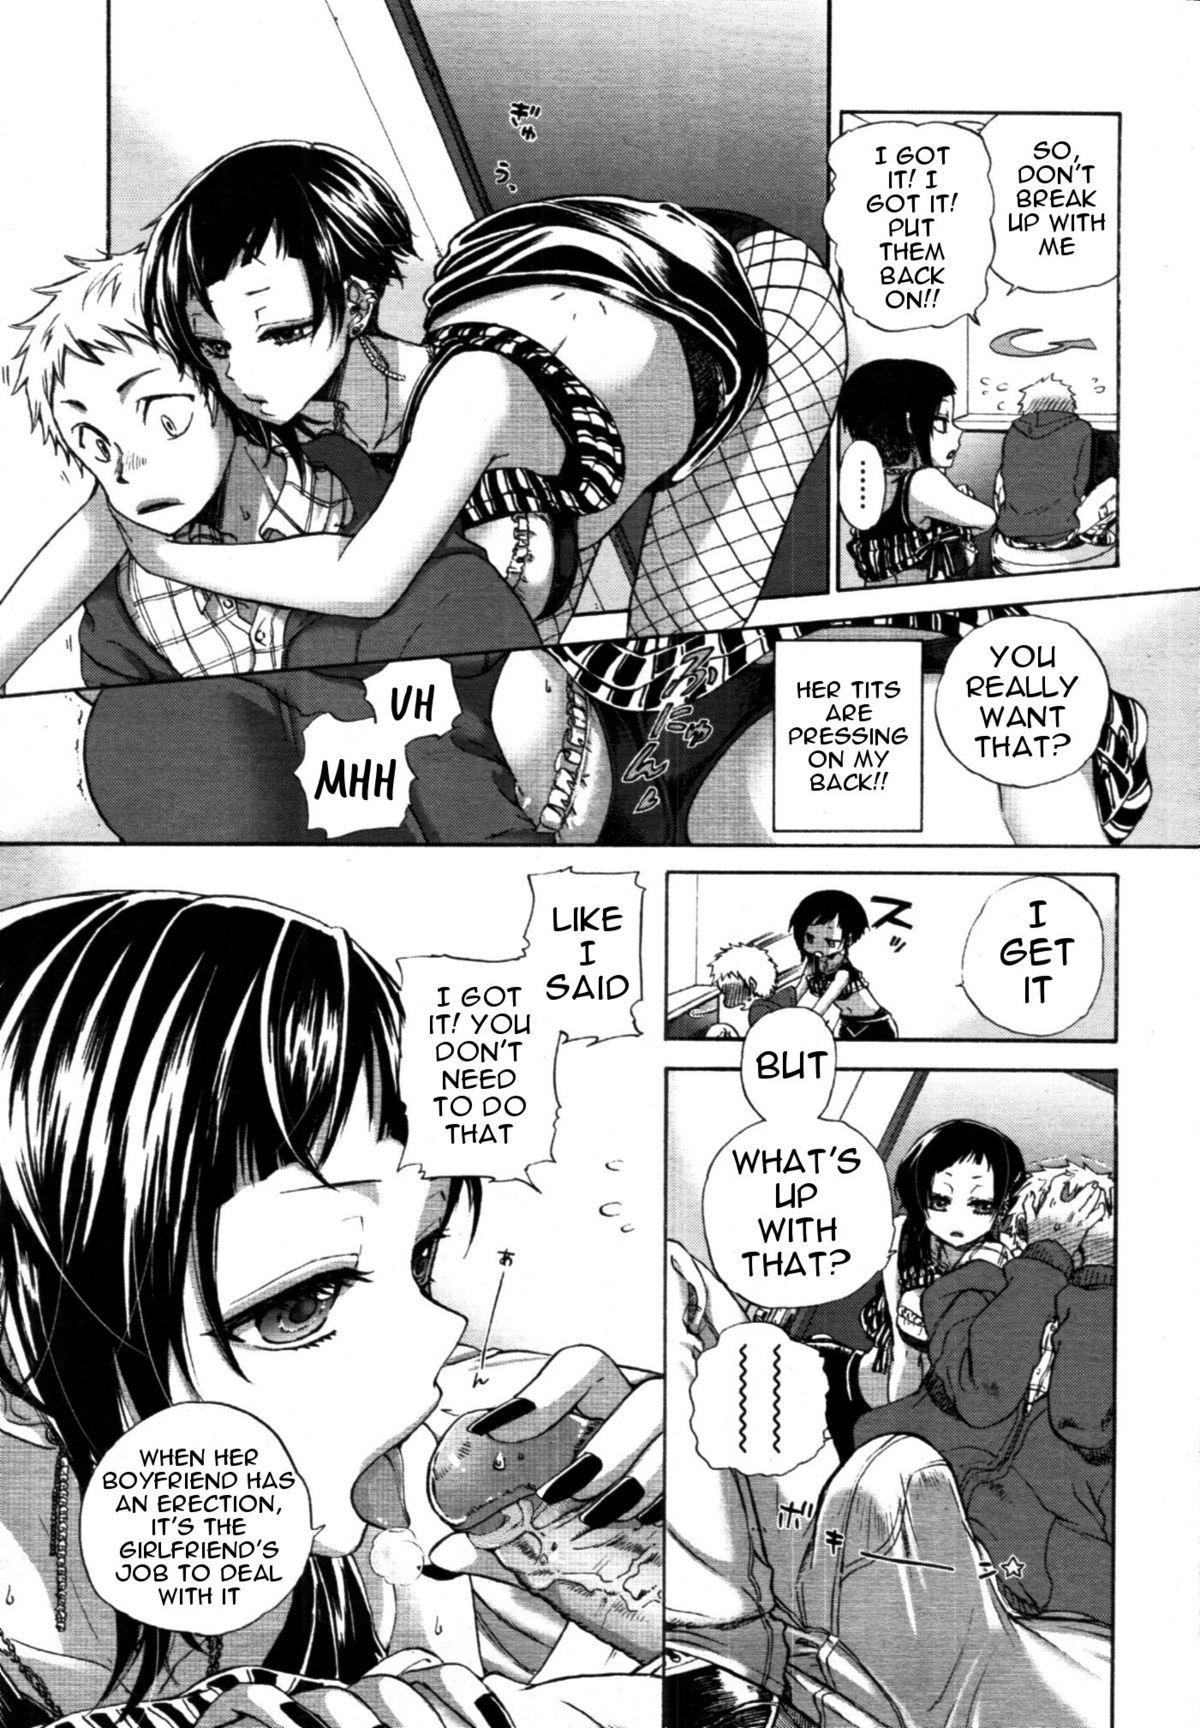 Prostitute Hatsu Date. | First Date Room - Page 7